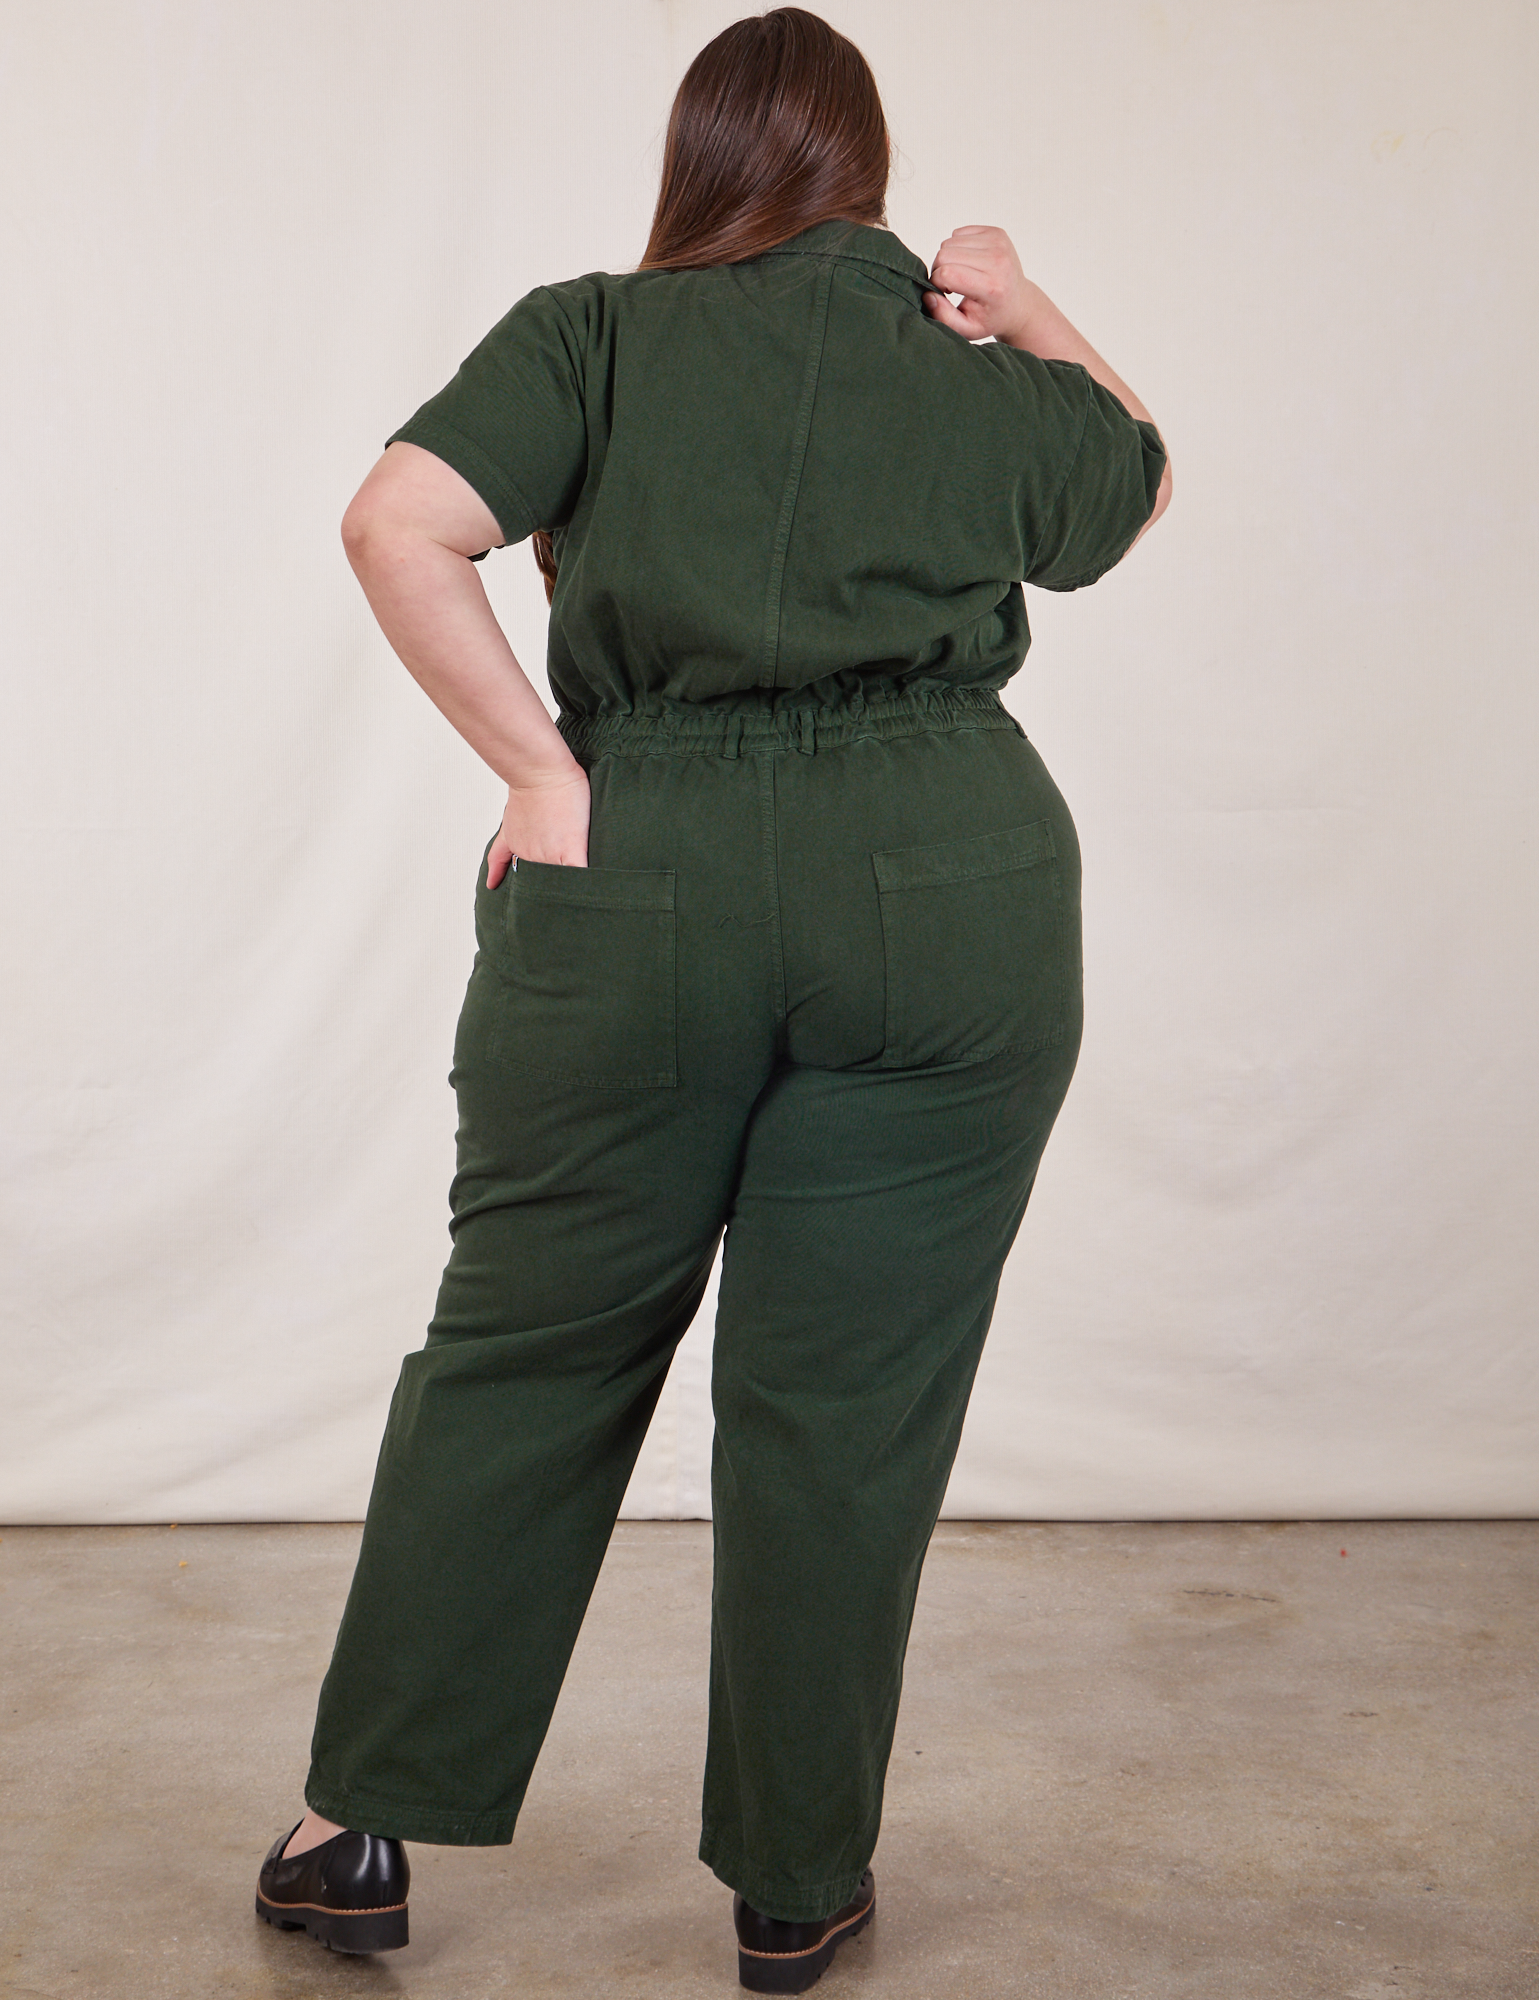 Short Sleeve Jumpsuit in Swamp Green back view on Marielena